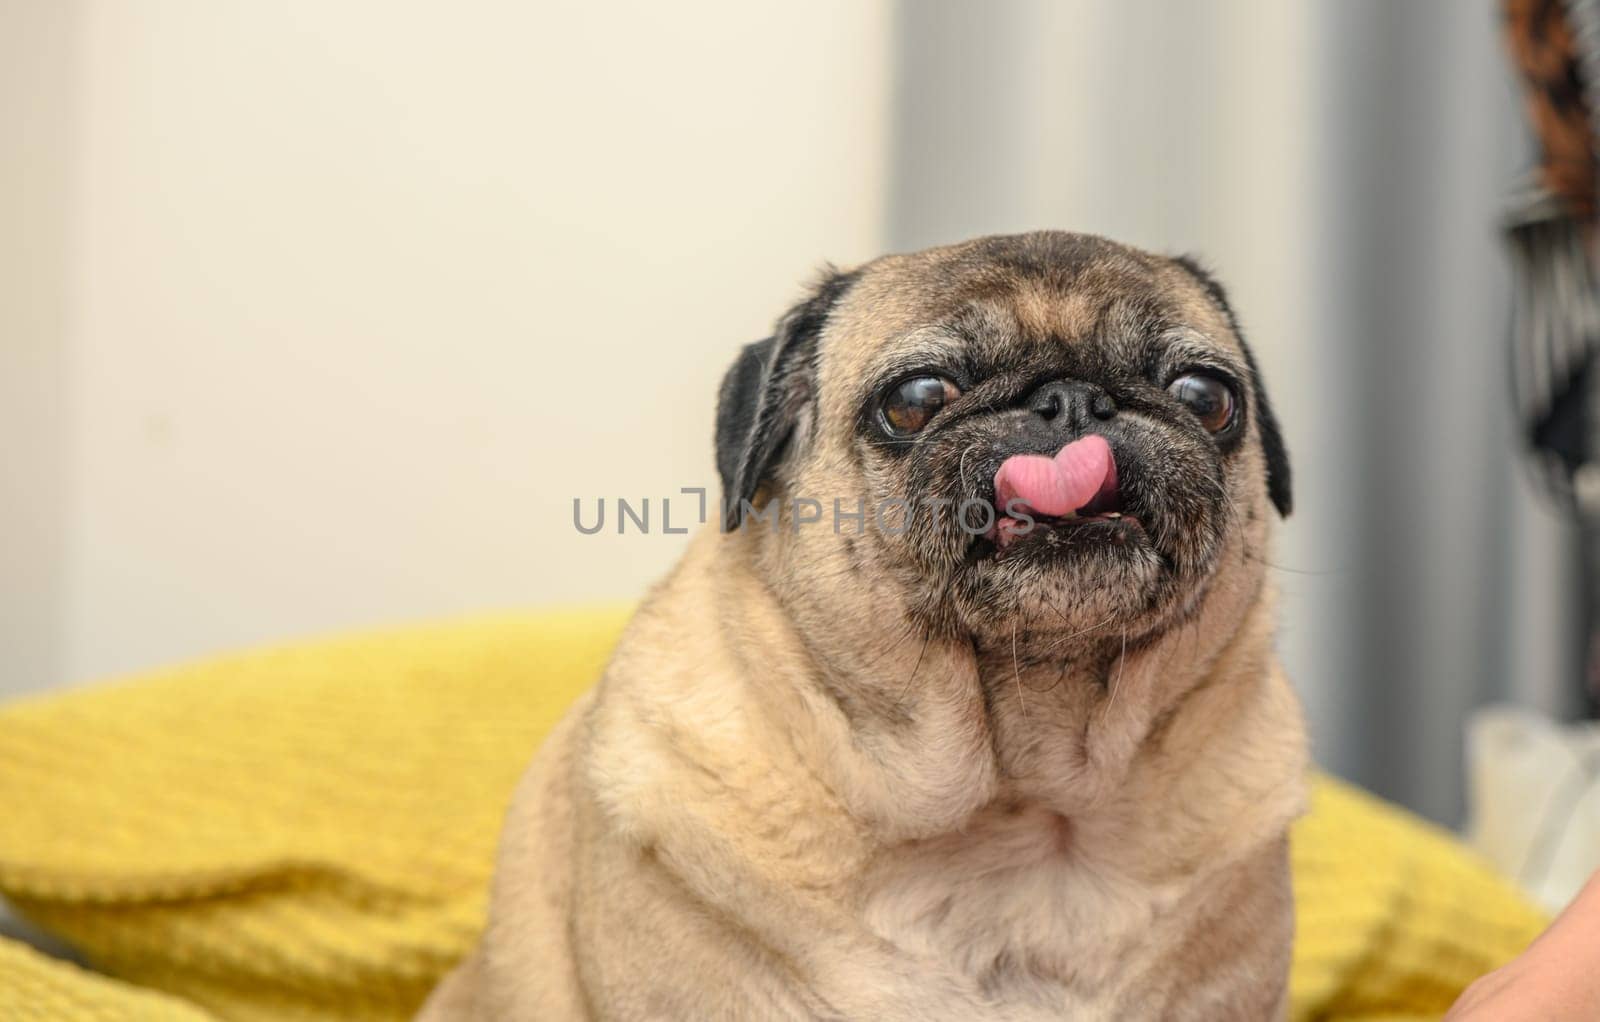 old pug on a sofa with yellow pillows 2 by Mixa74